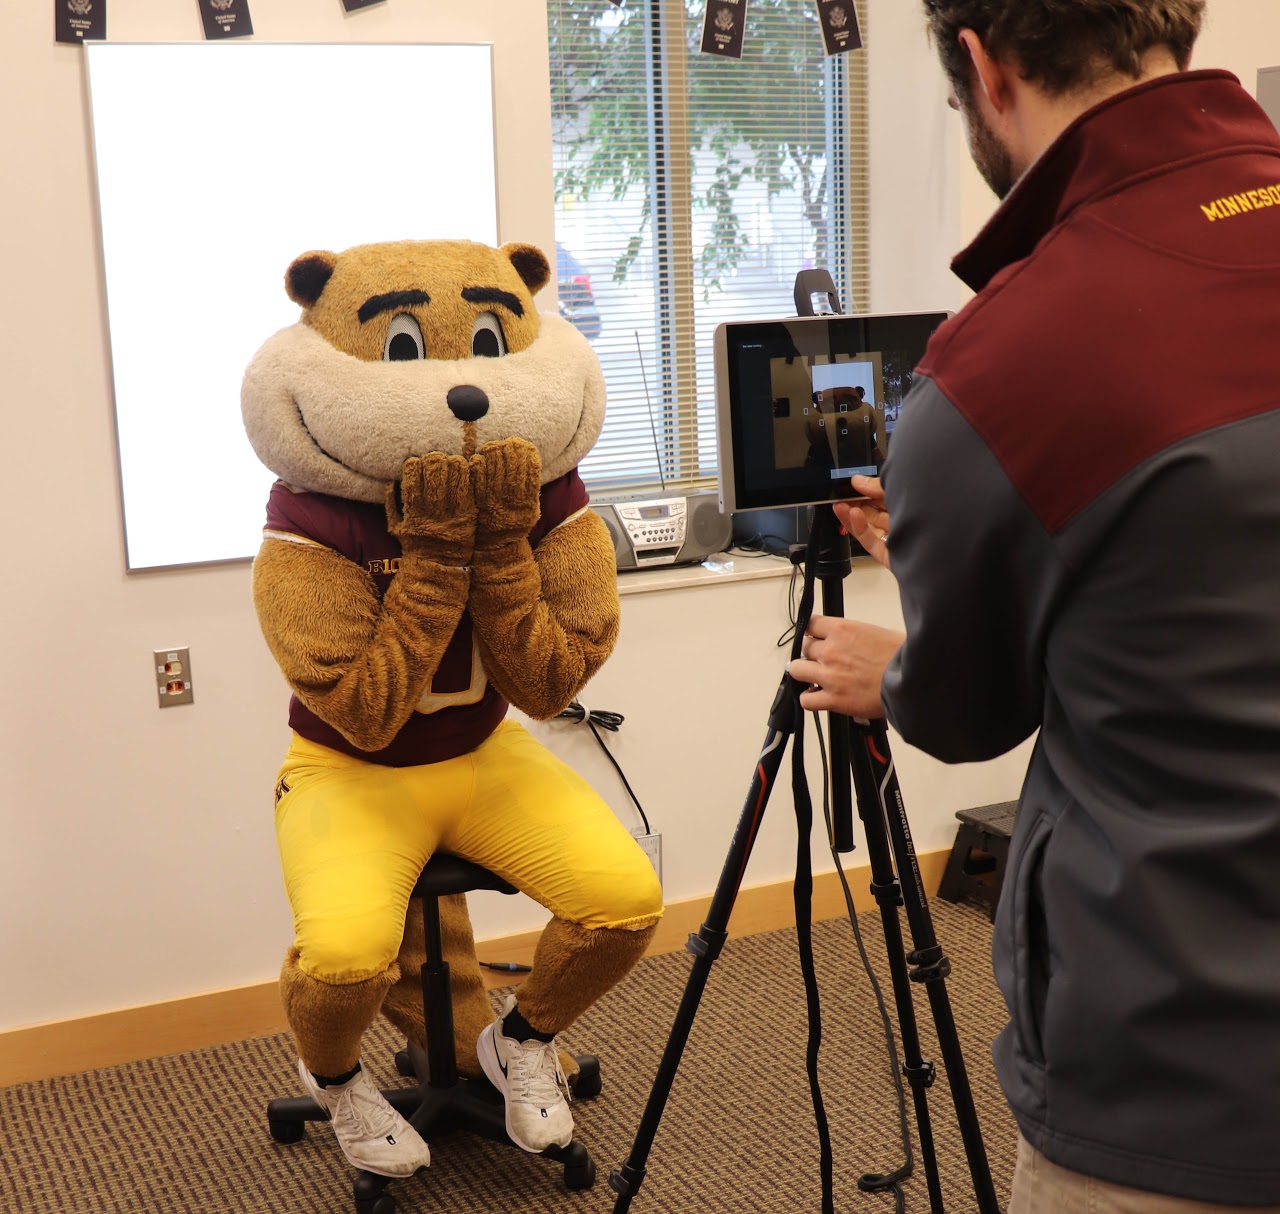 Goldy poses for a passport photo